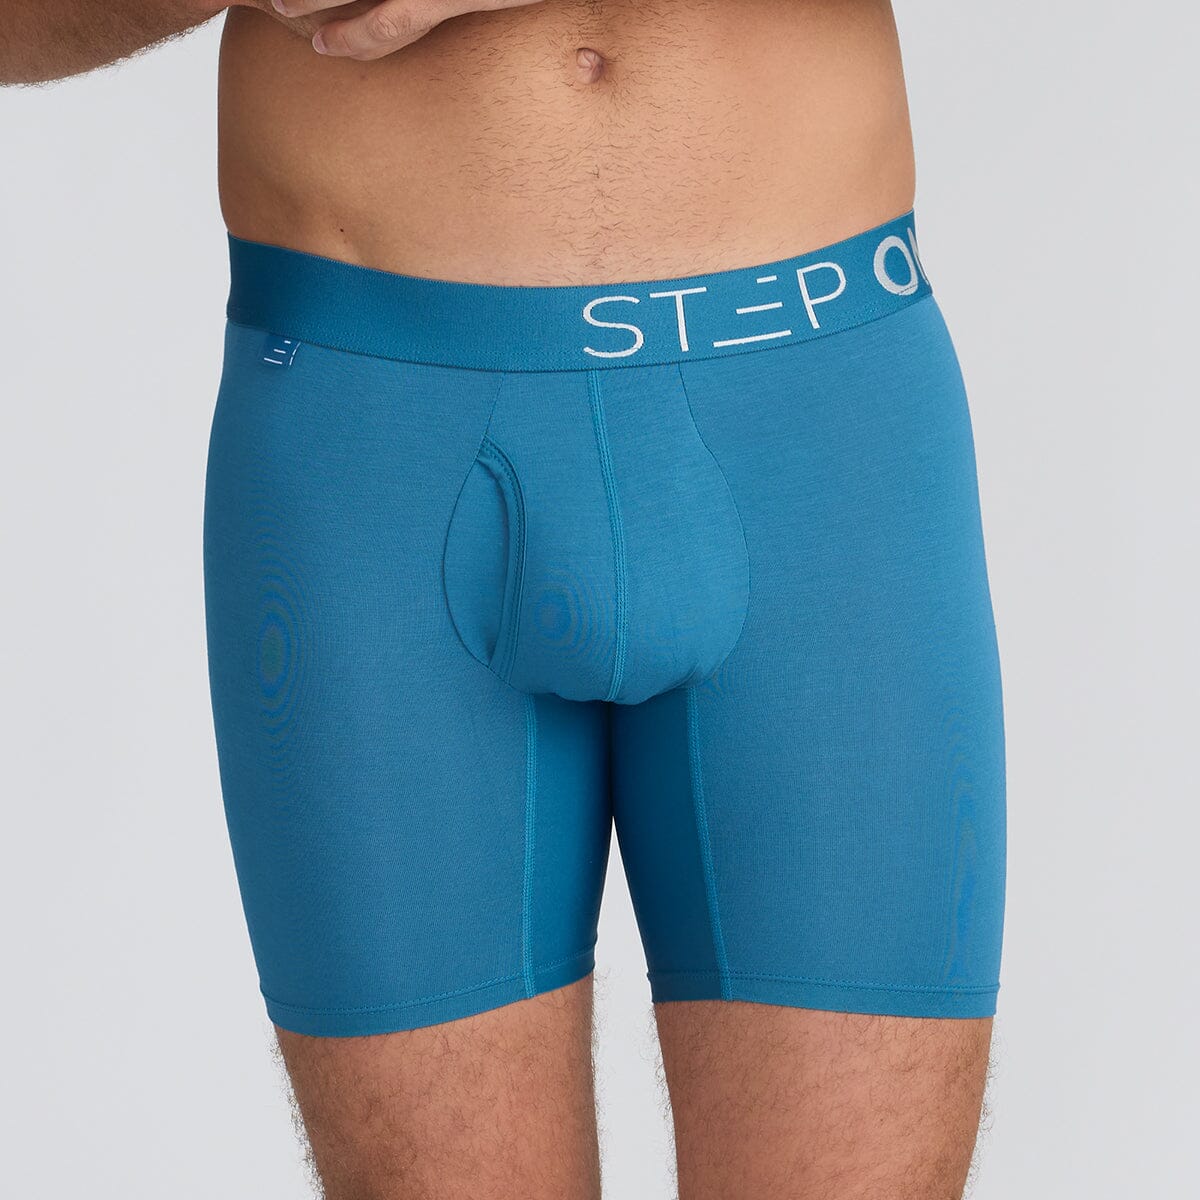 Blue Men's Bamboo Underwear with Fly